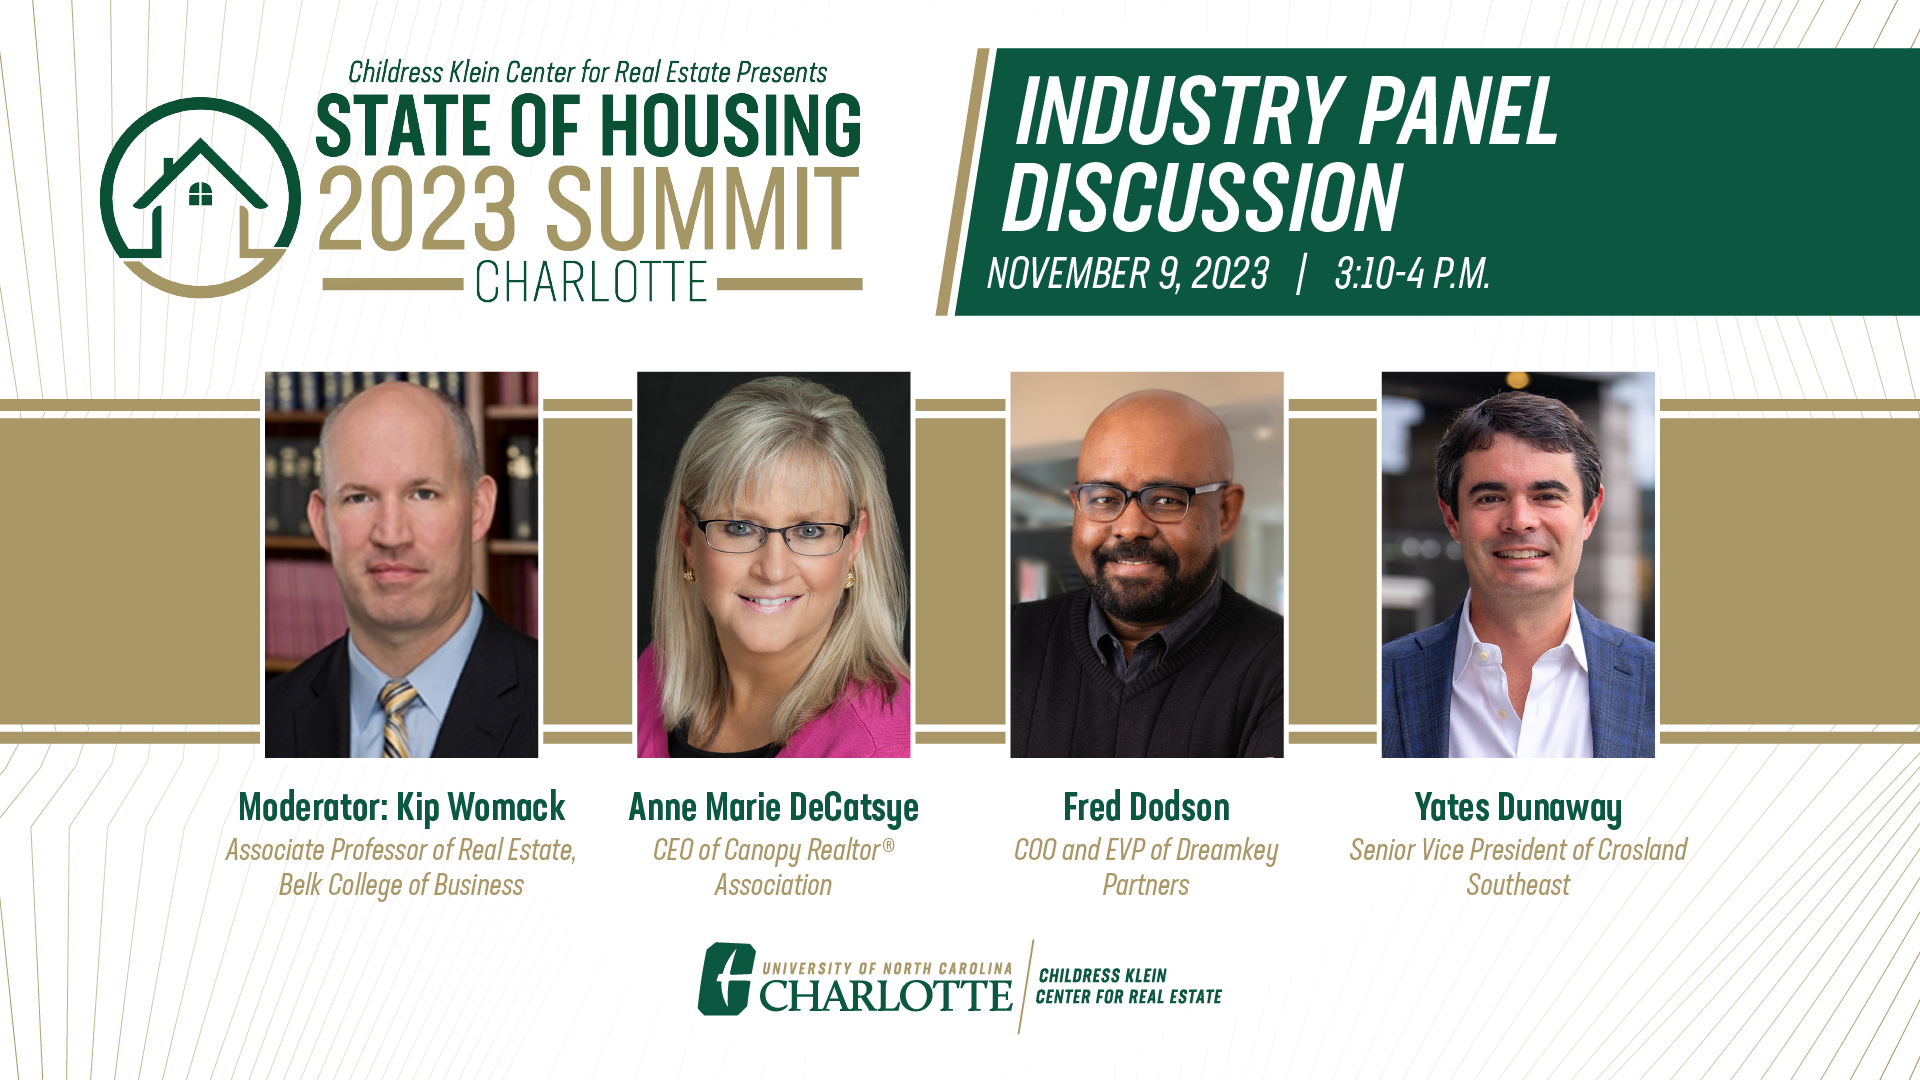 The Childress Klein Center for Real Estate Presents the 2023 State of Housing in Charlotte Summit: Industry Panel Discussion, November 9, 2023, from 3:10-4 pm.  Featuring: Moderator, Kip Womack, Associate Professor of Real Estate, Belk College of Business; Panelists: Anne Marie DeCatsye, CEO of Canopy Realtors Association; Fred Dodson, COO and EVP of Dreamkey Partners; and Yates Dunaway, Senior Vice President of Crosland Southeast